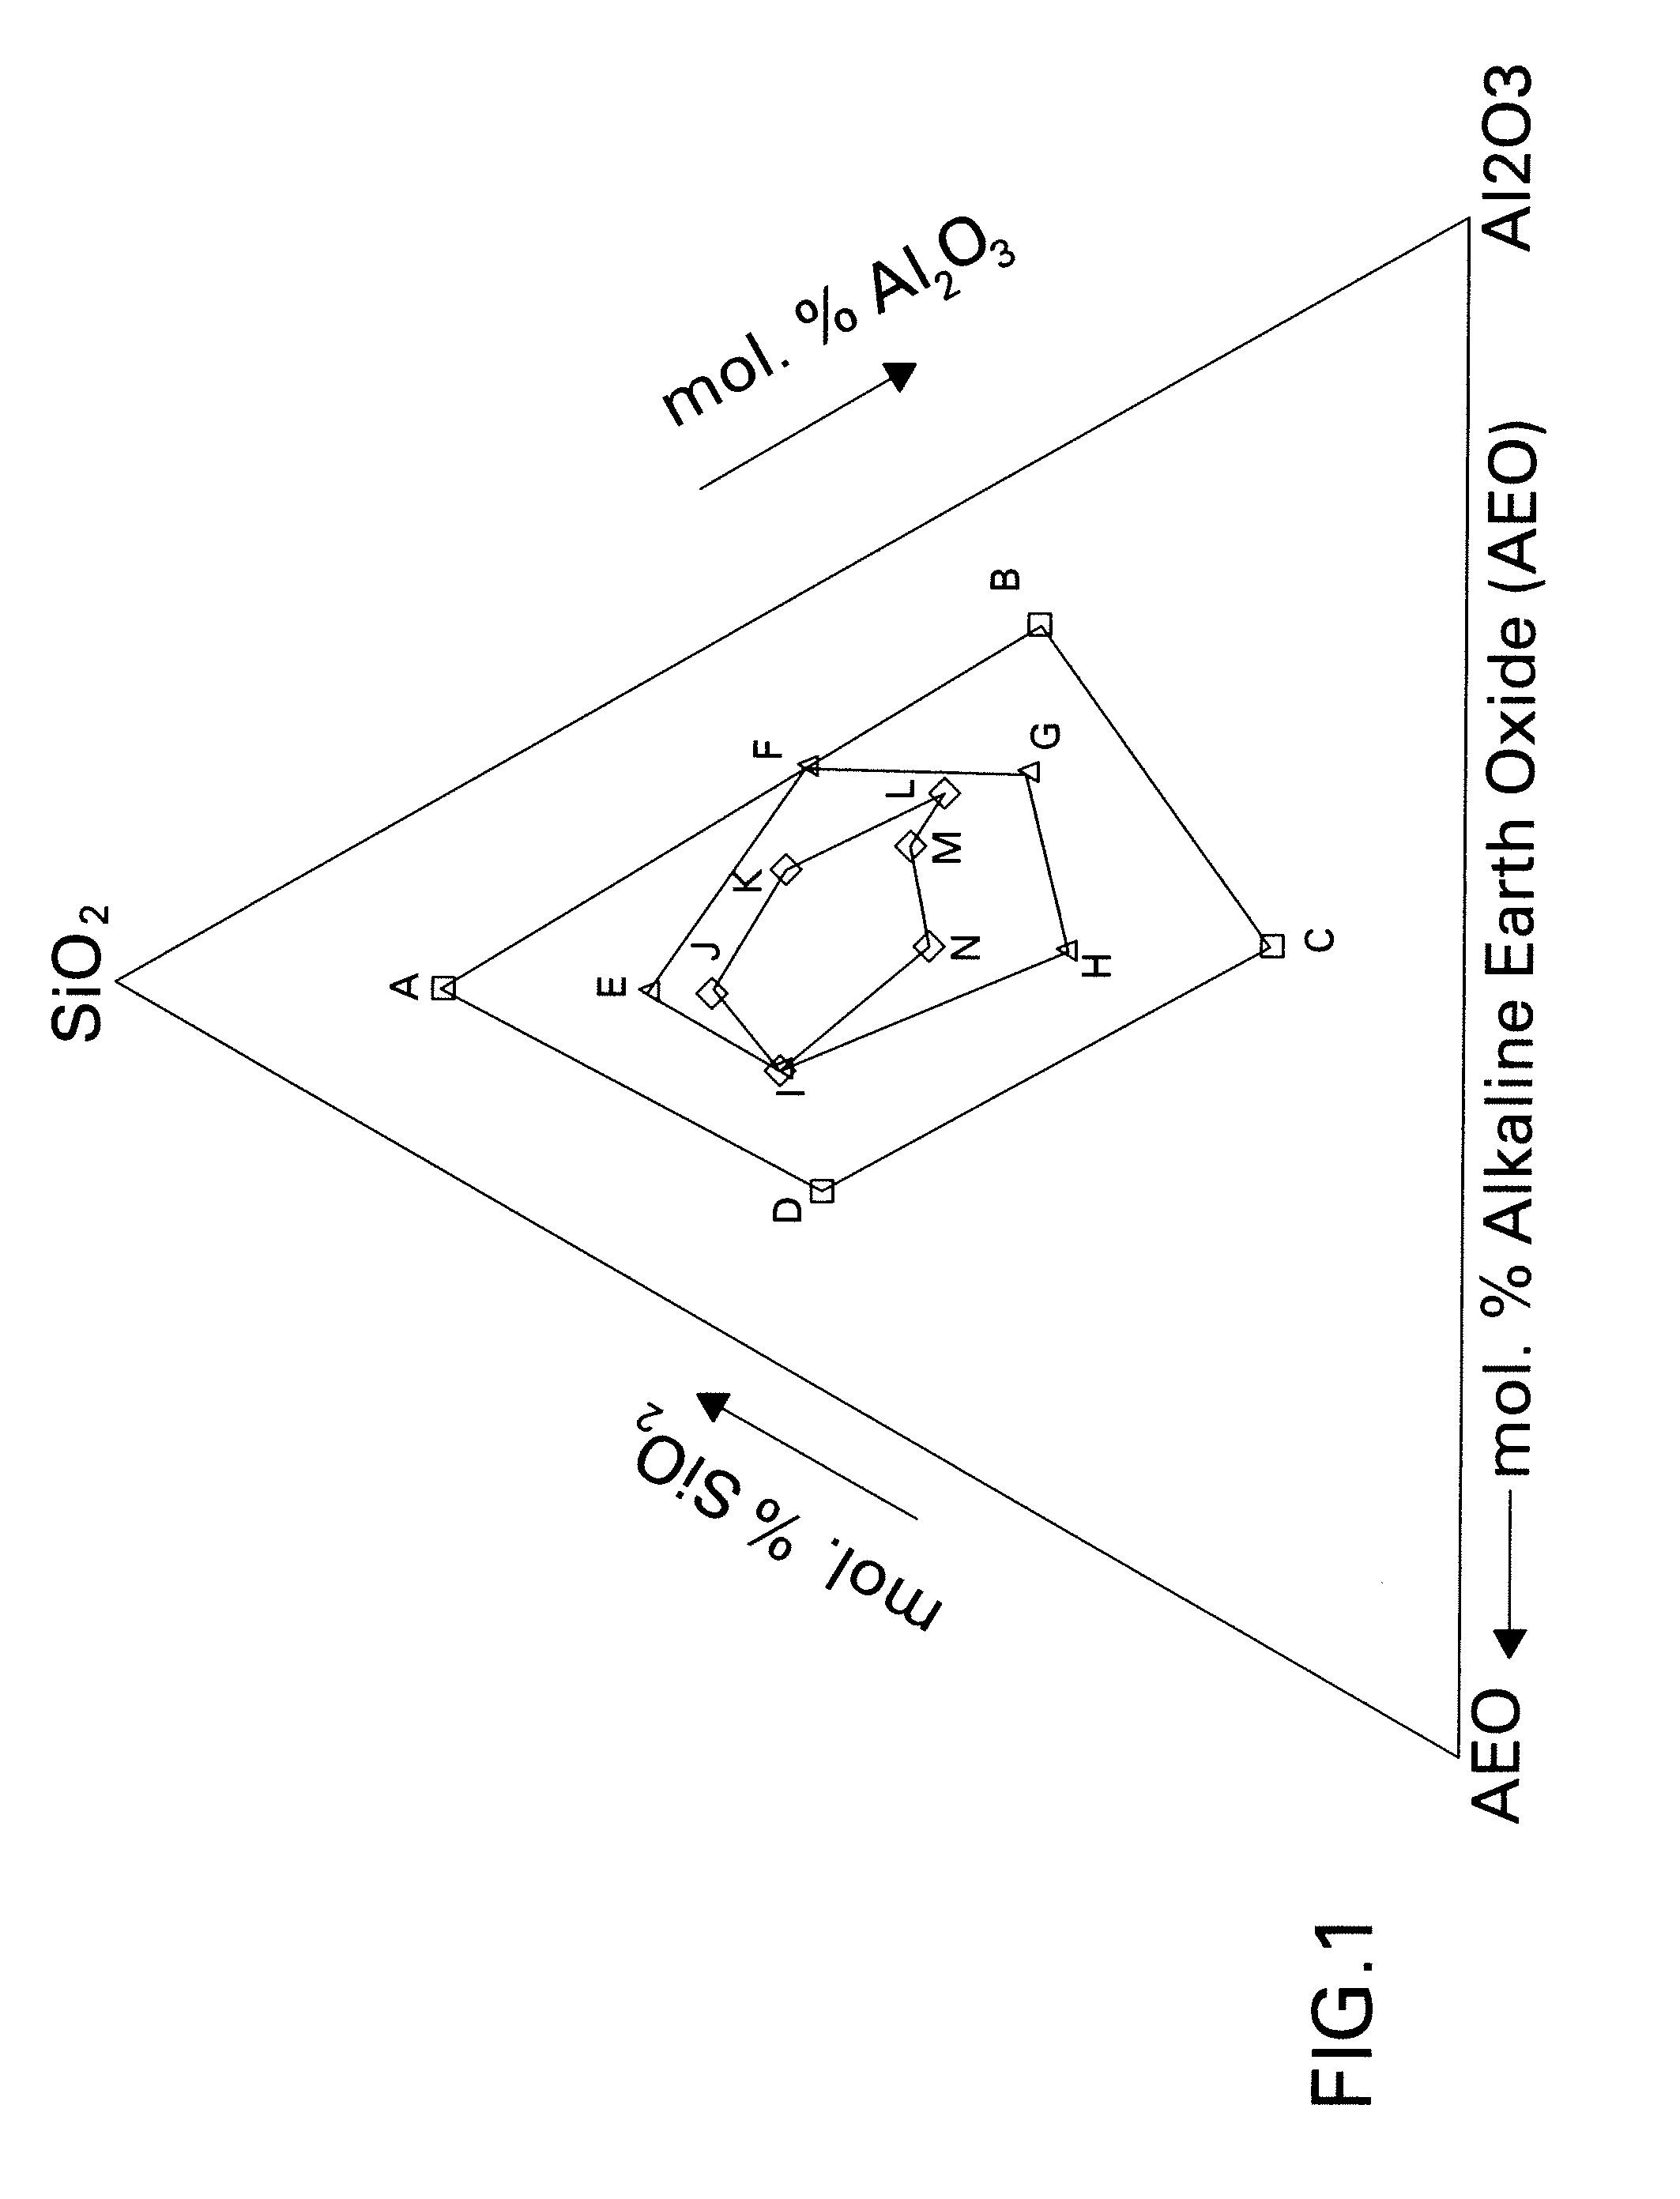 Articles for high temperature service and methods for their manufacture